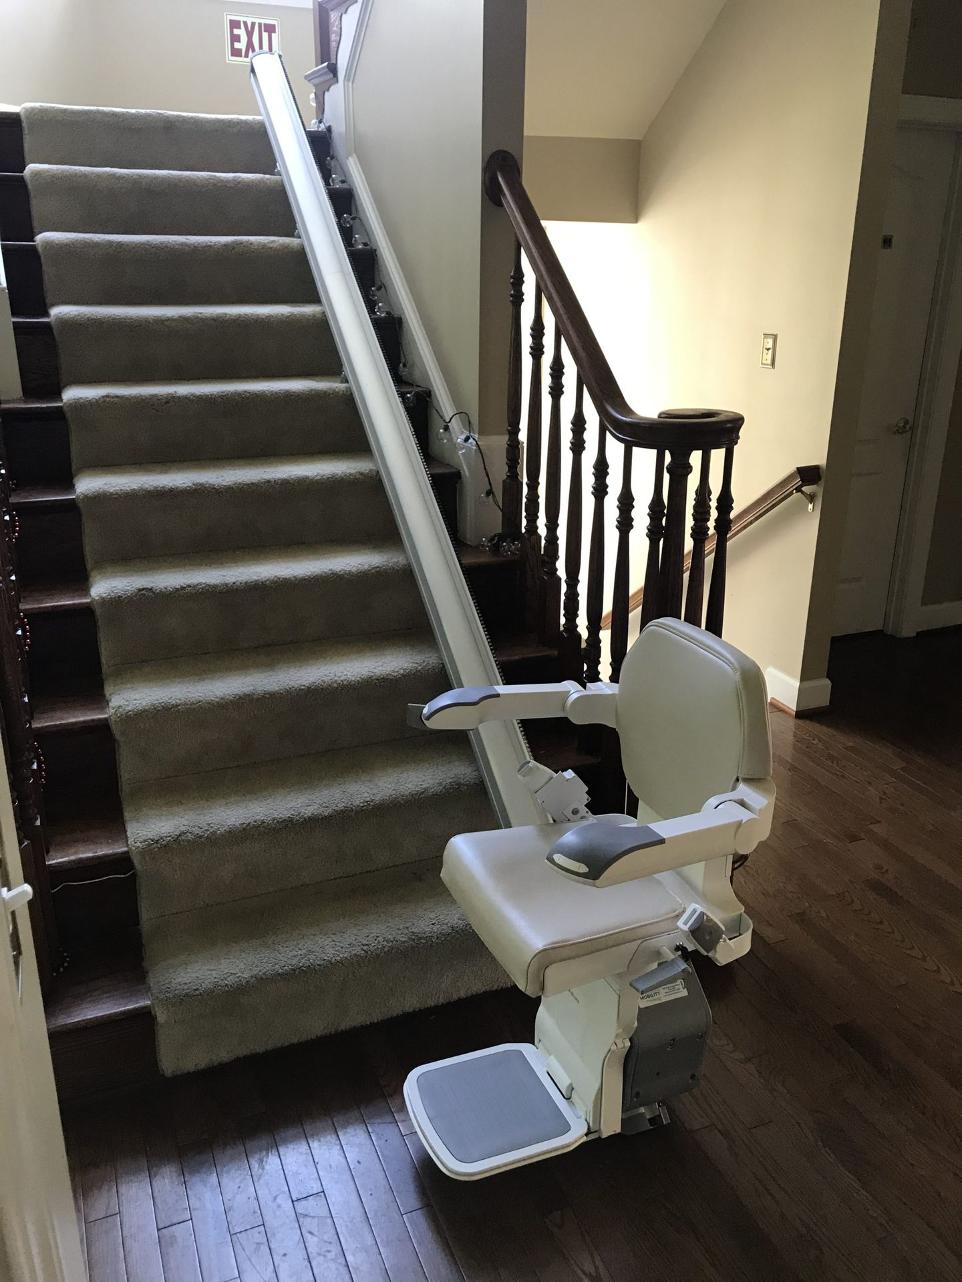 stairlift at the bottom of the stairs